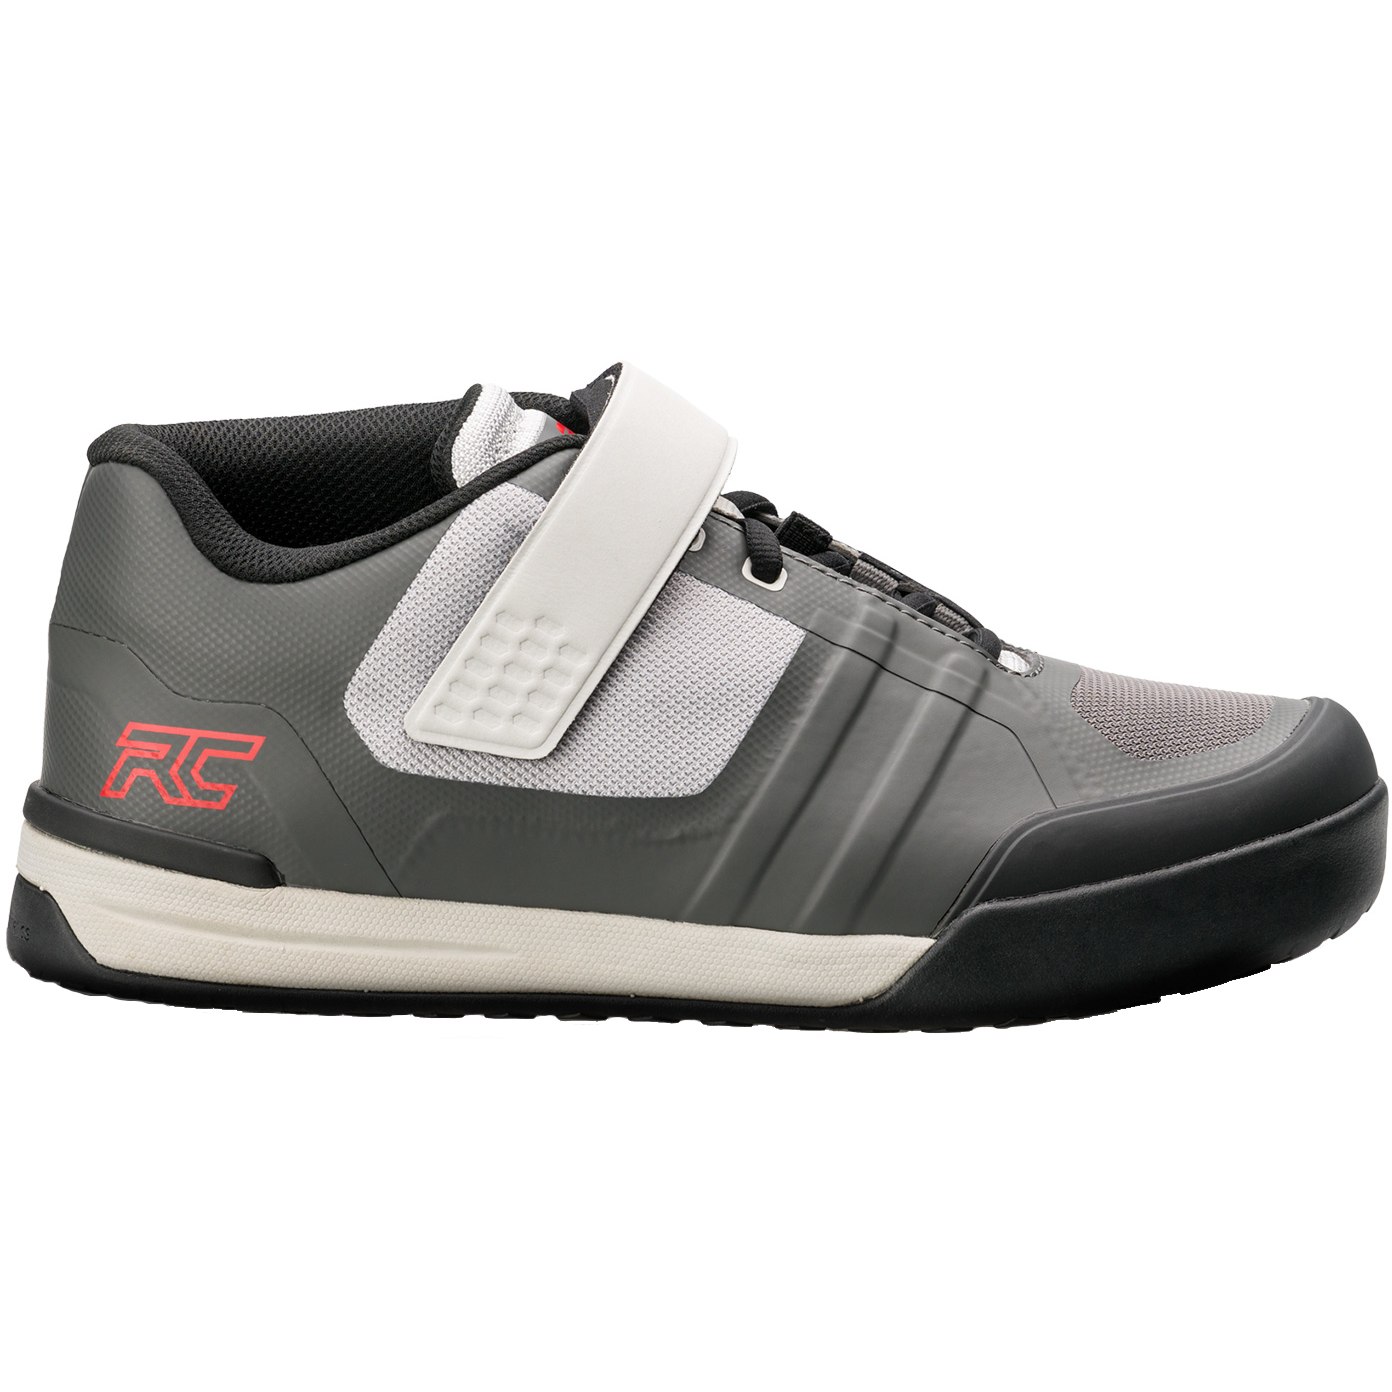 Produktbild von Ride Concepts Transition Clipless Schuh - Charcoal / Red